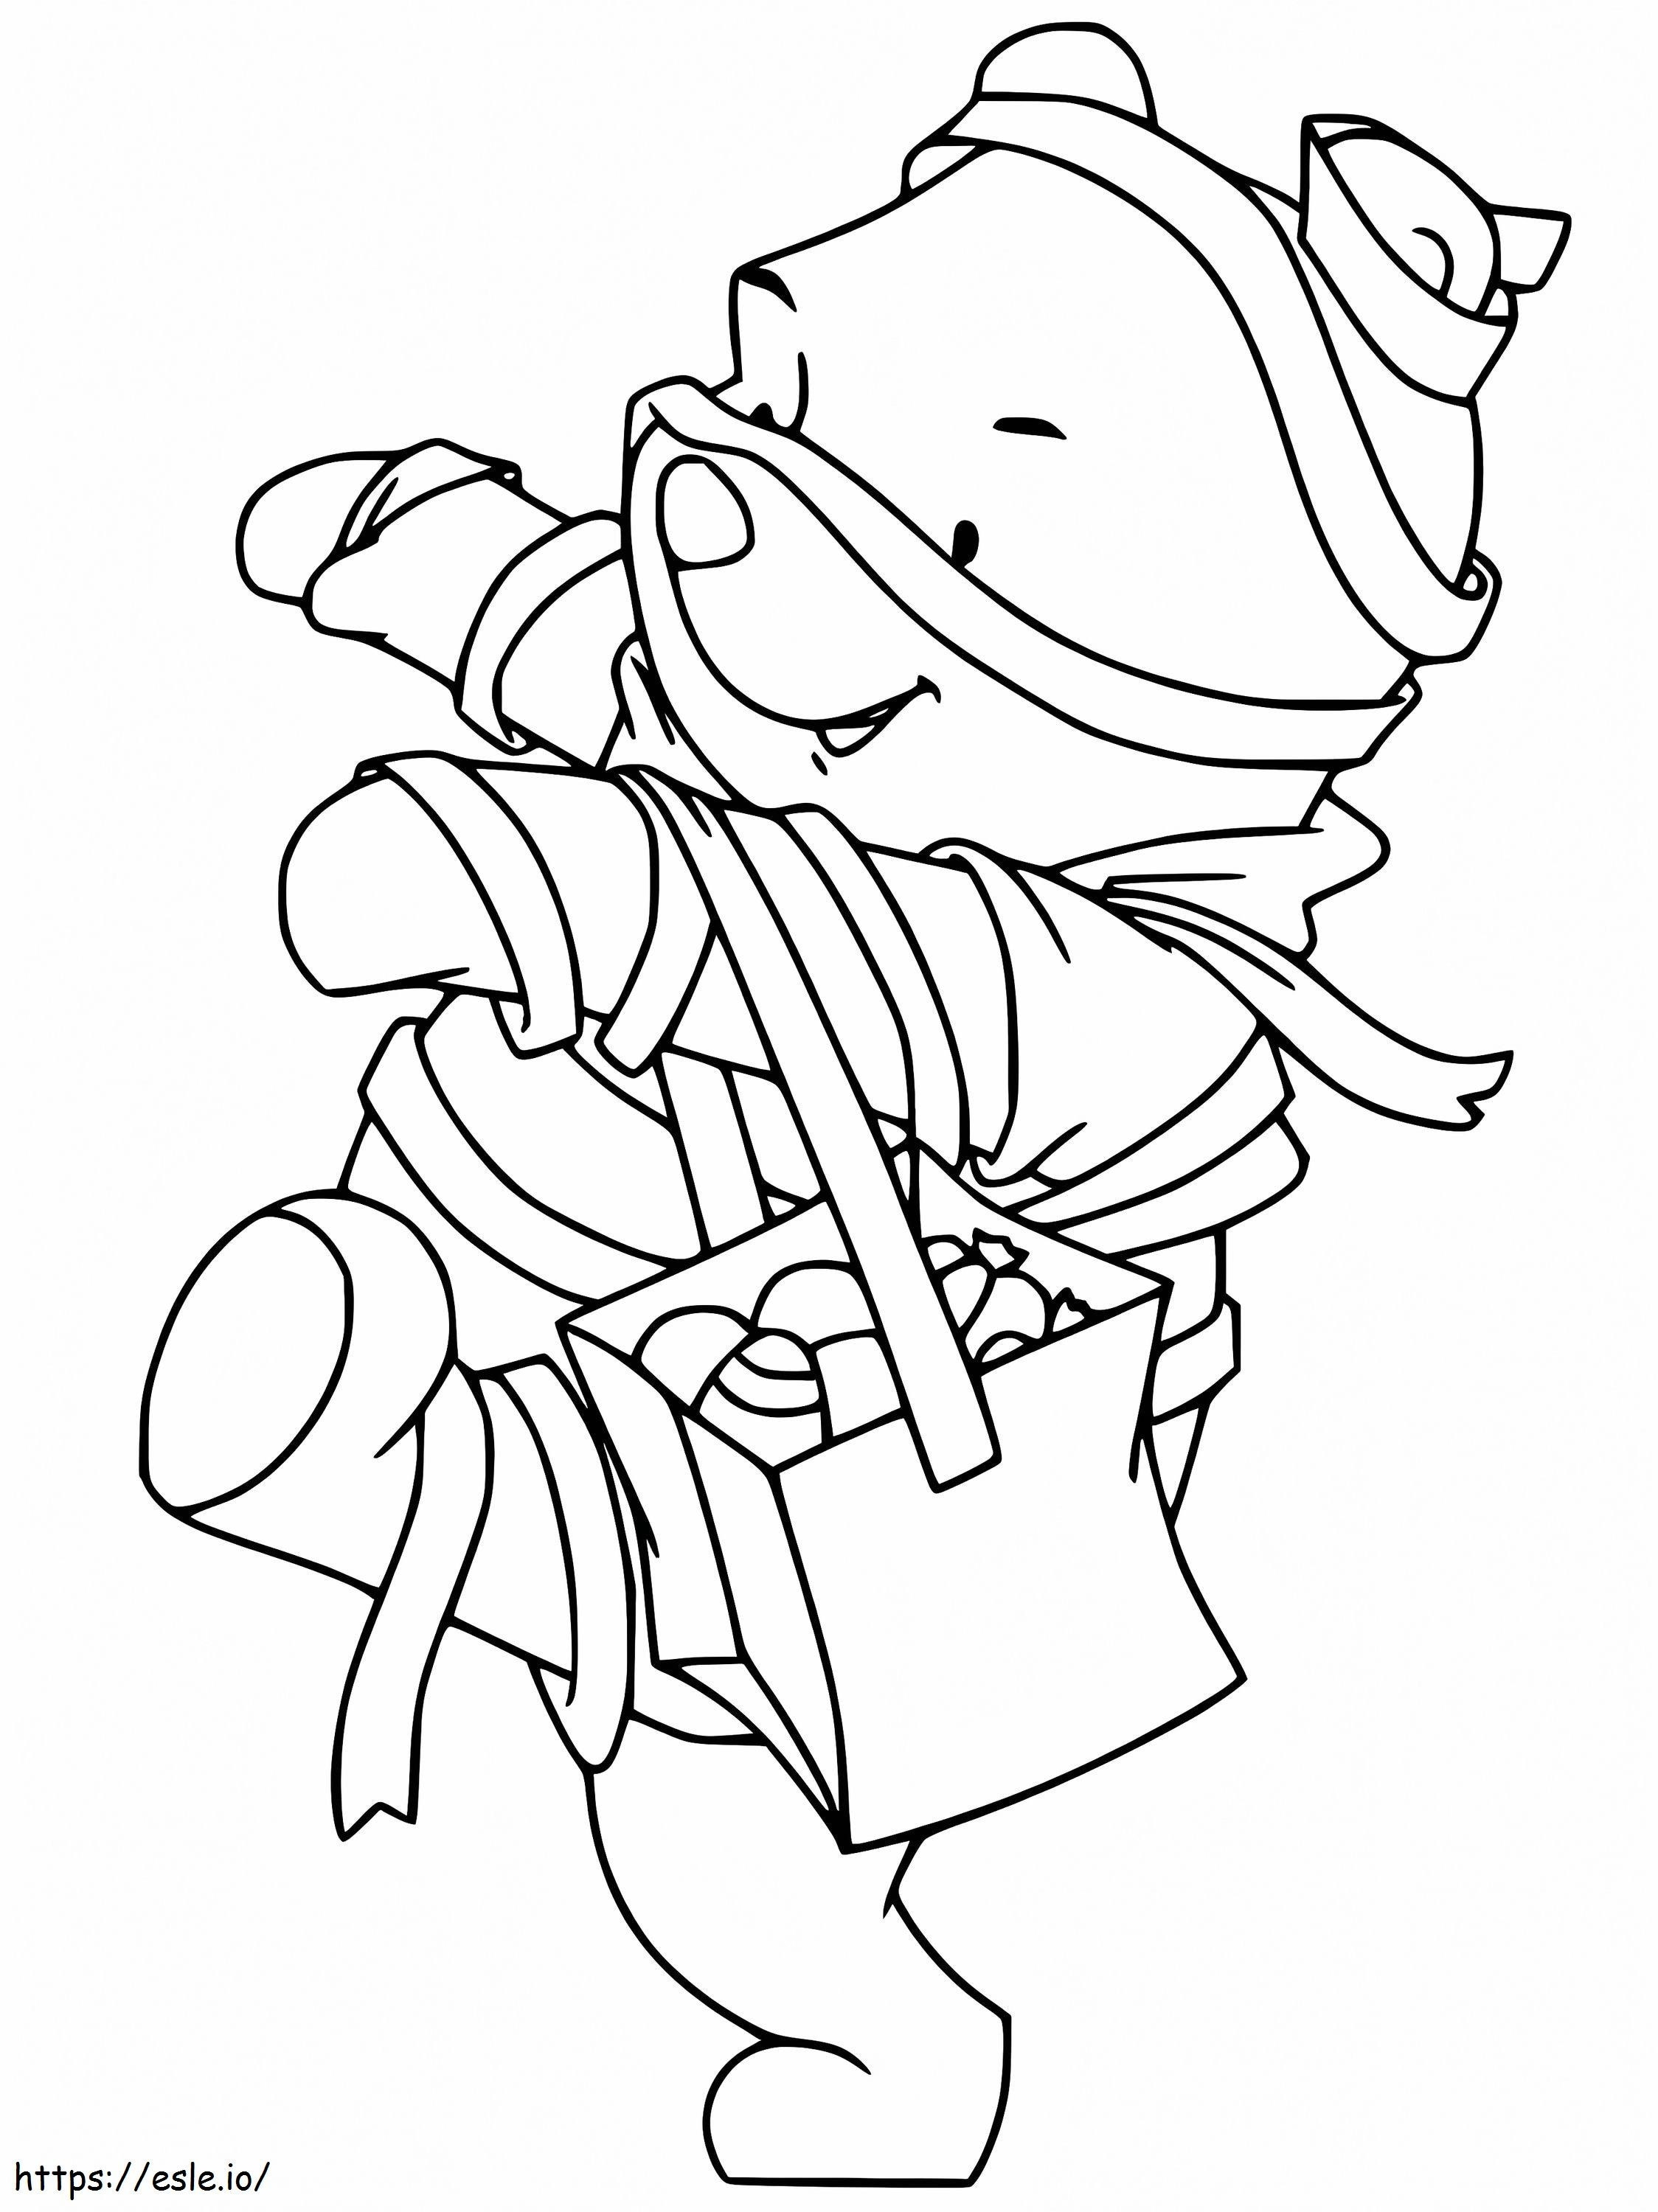 Mummy Pooh coloring page